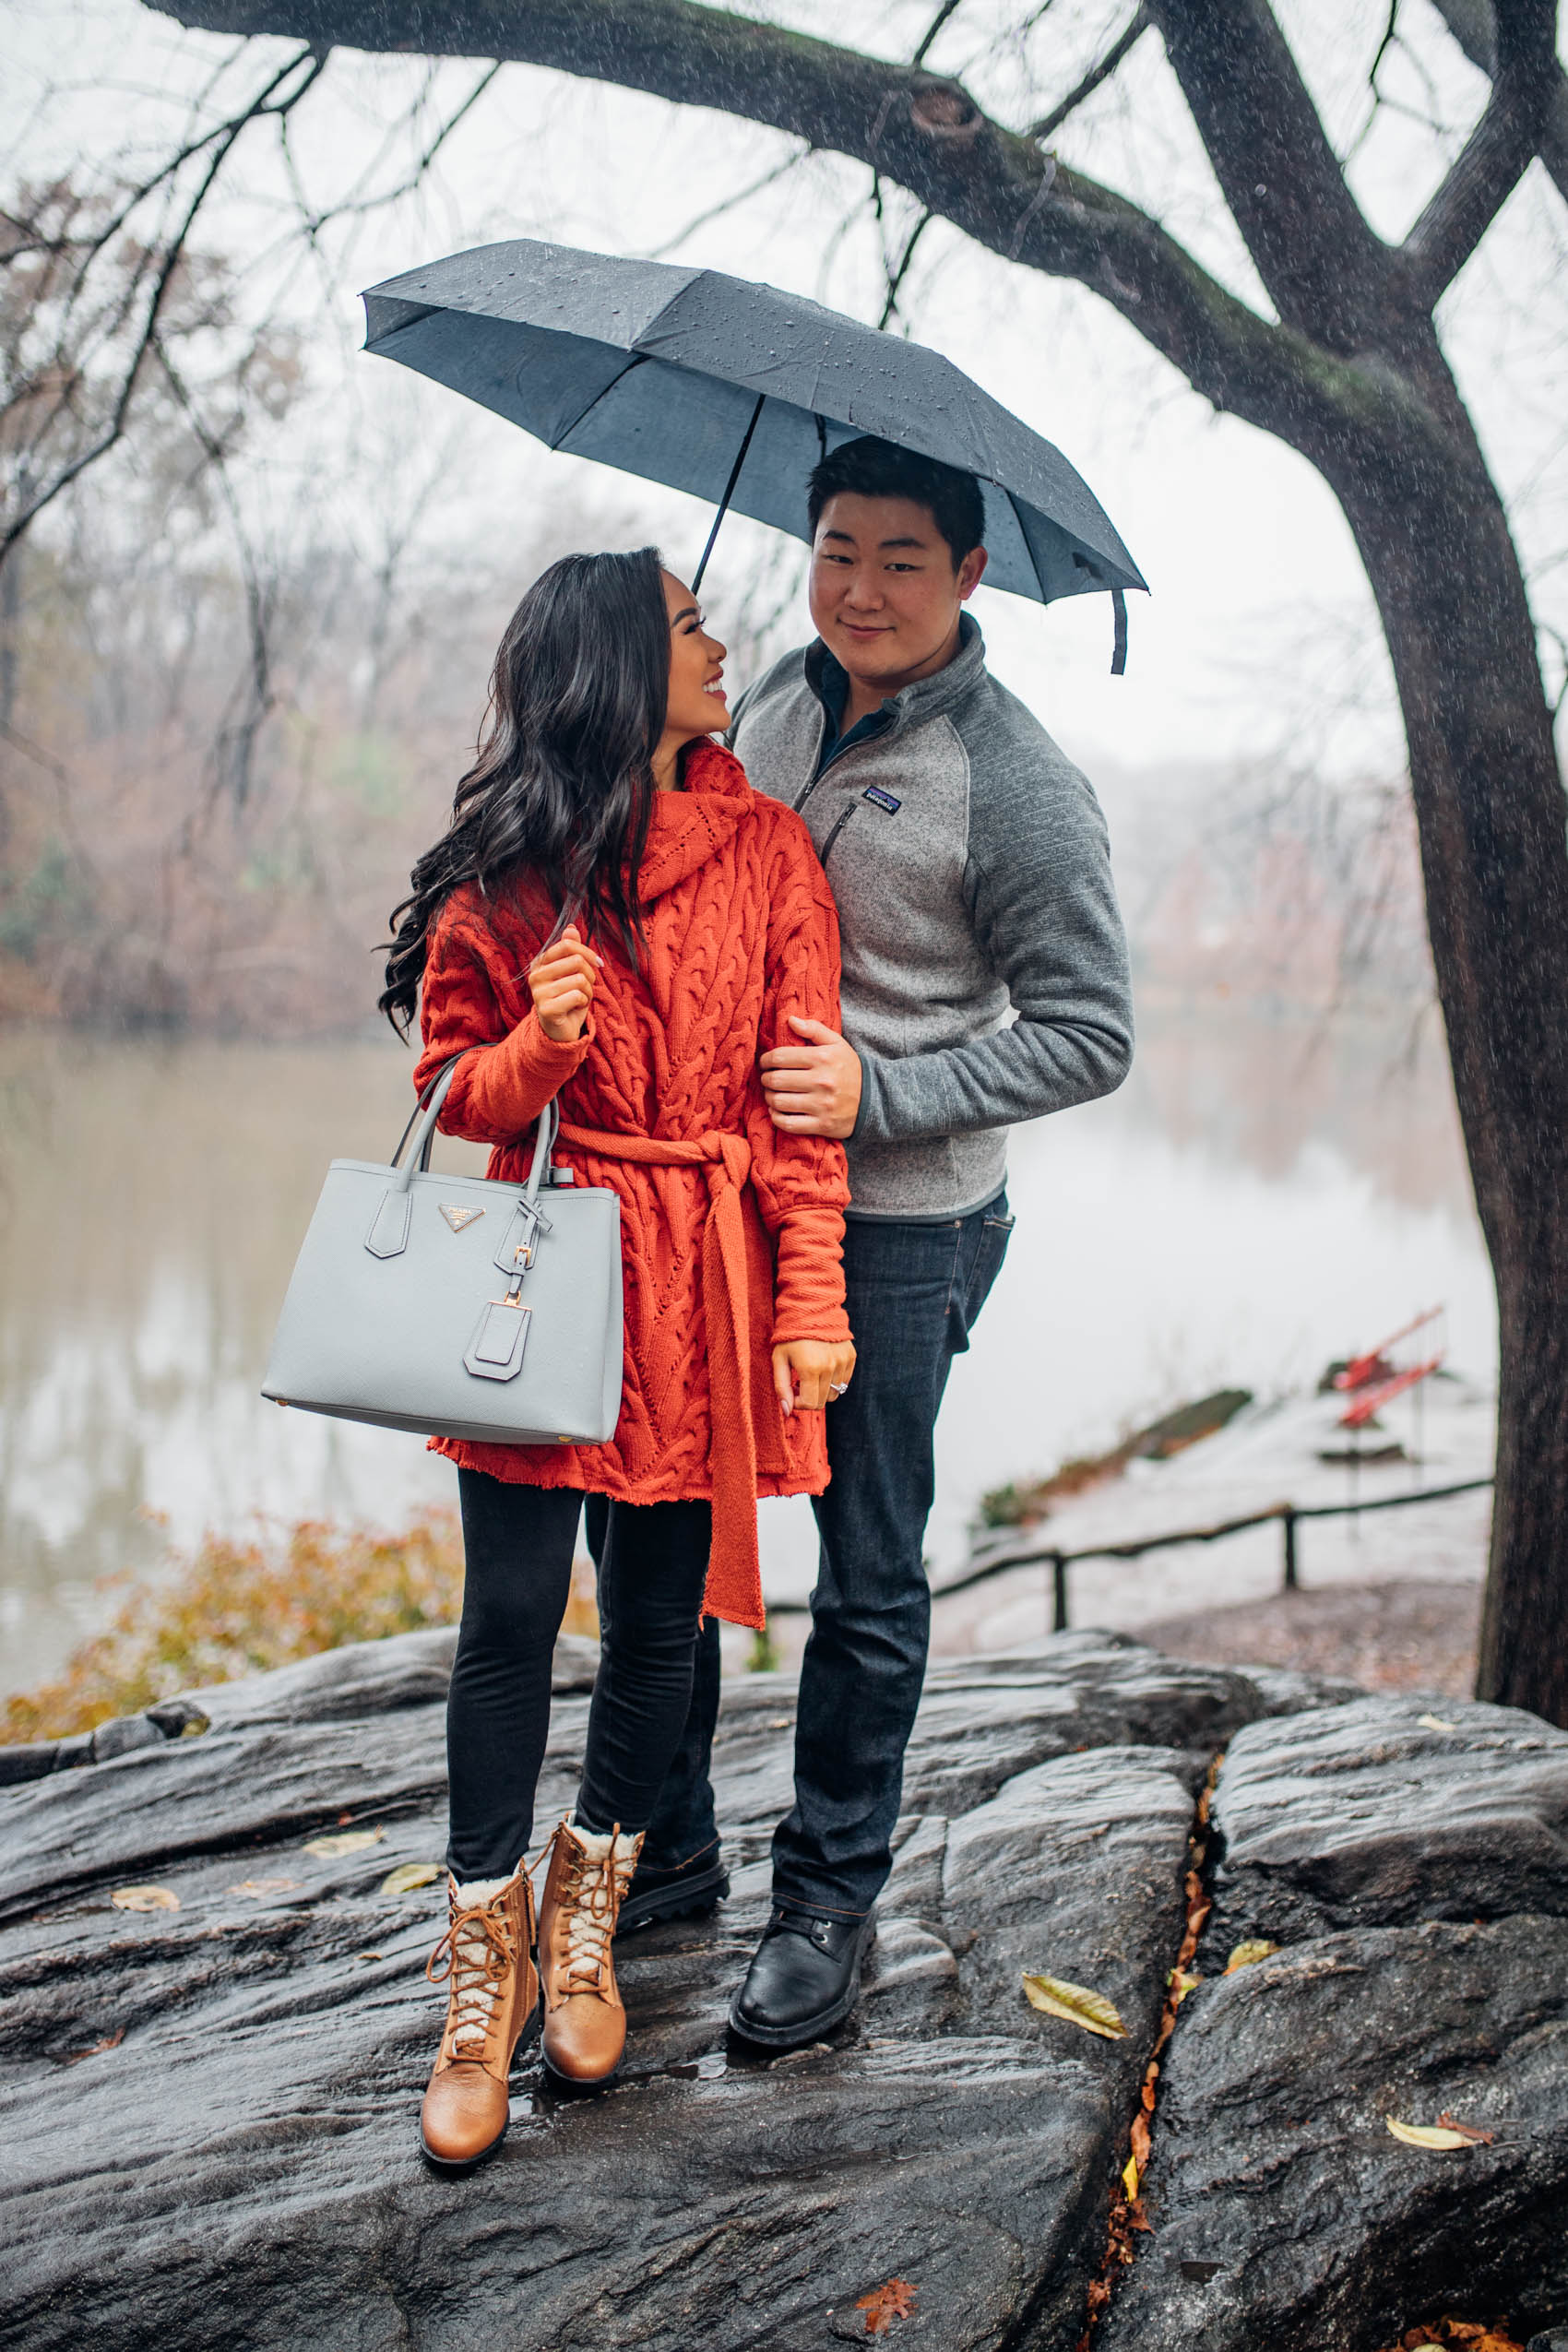 Blogger Hoang-Kim and her boyfriend wears Sorel Footwear during a winter trip to New York City